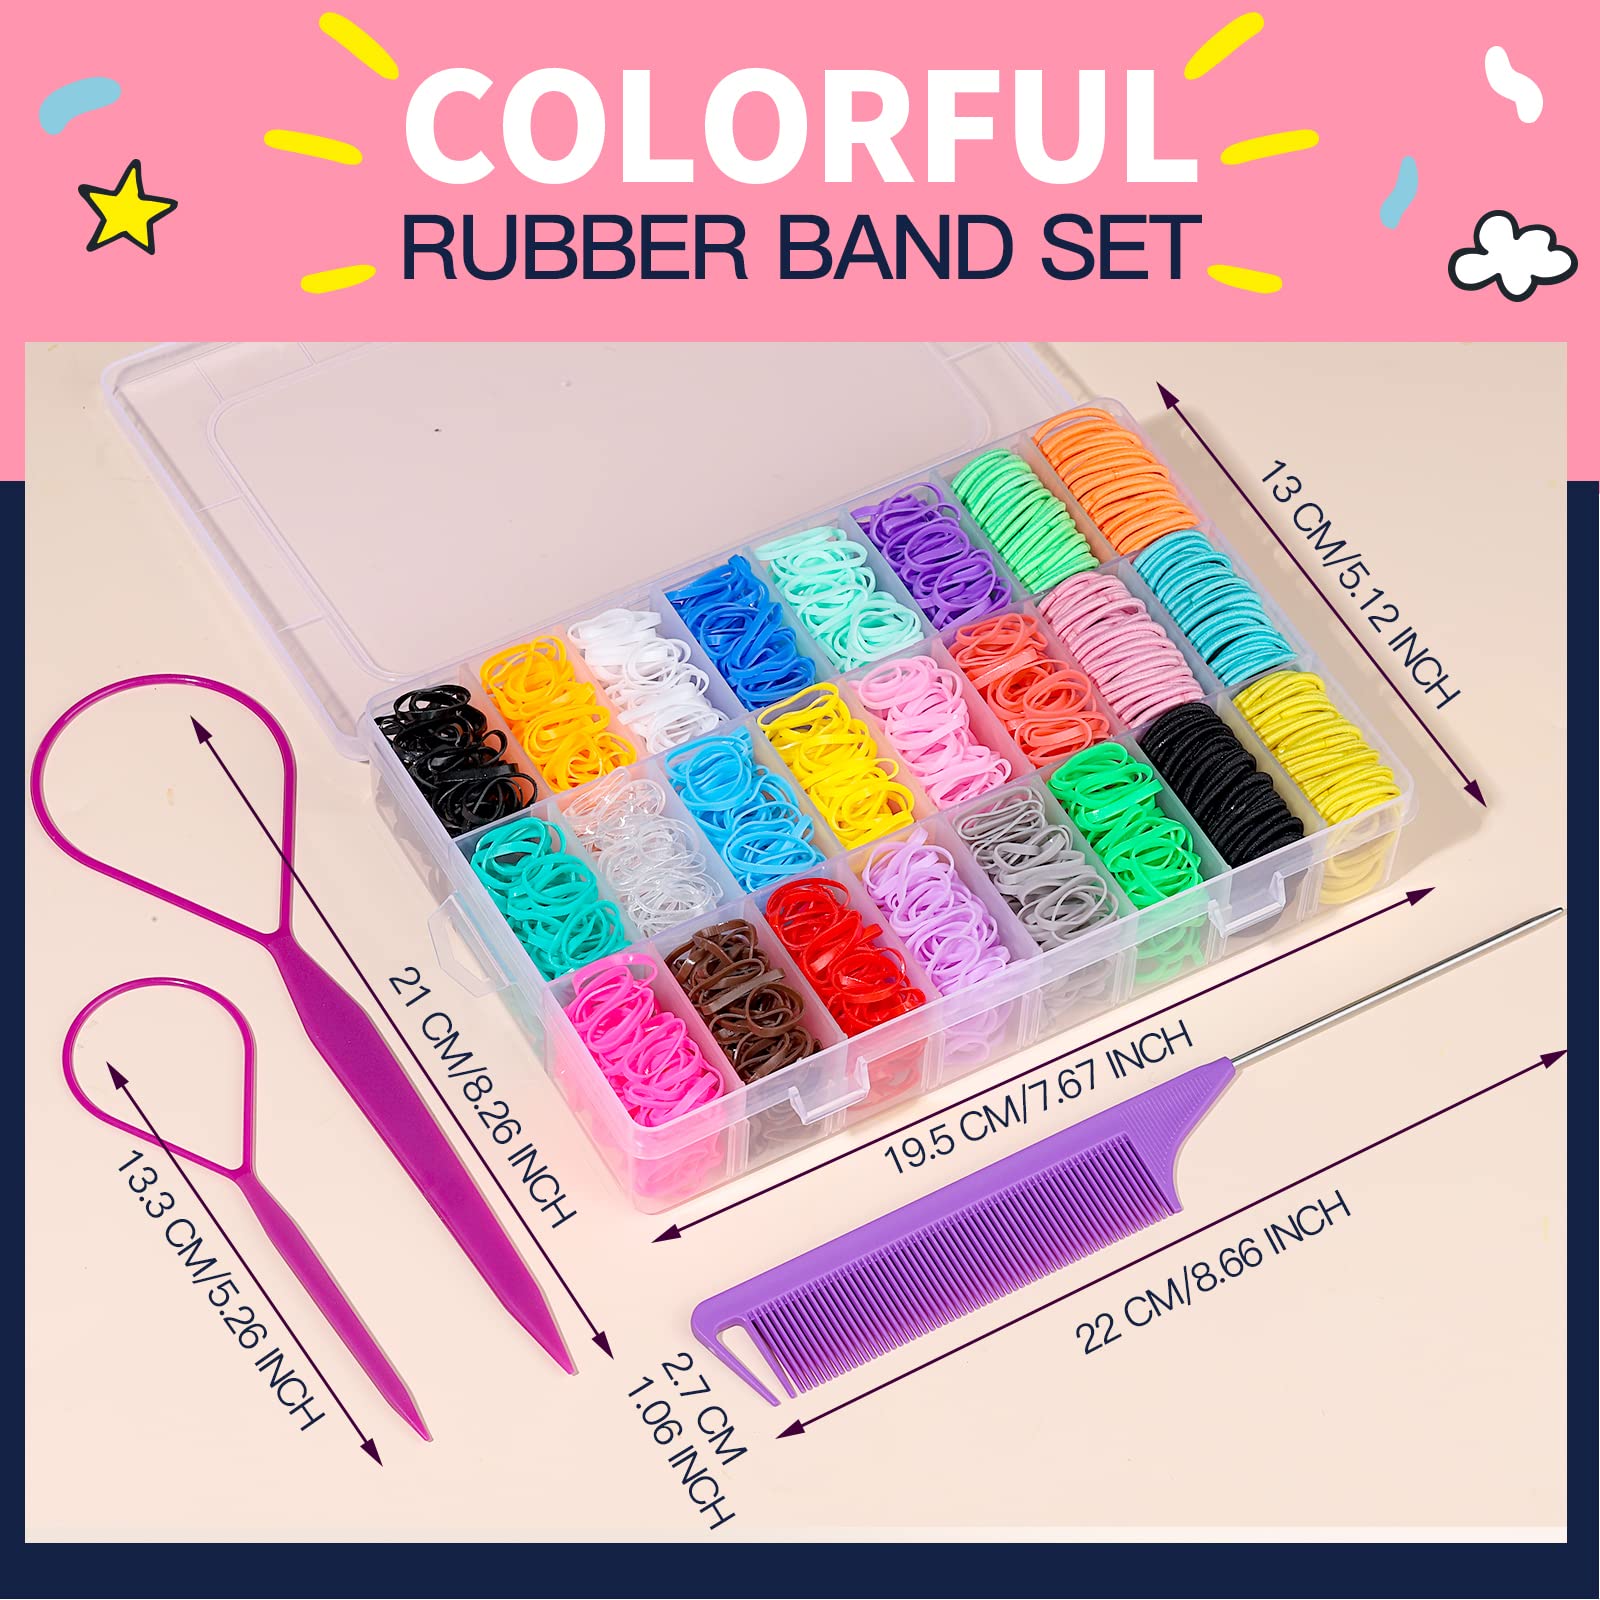 Elastic Hair Bands, YGDZ 1500pcs Hair Rubber Bands and 120pcs Baby Hair Ties with Organizer Box, Colorful Small Hair Tie Set with Hair Tail Tools, Rat Tail Comb, Hair Accessories for Girl, Toddler